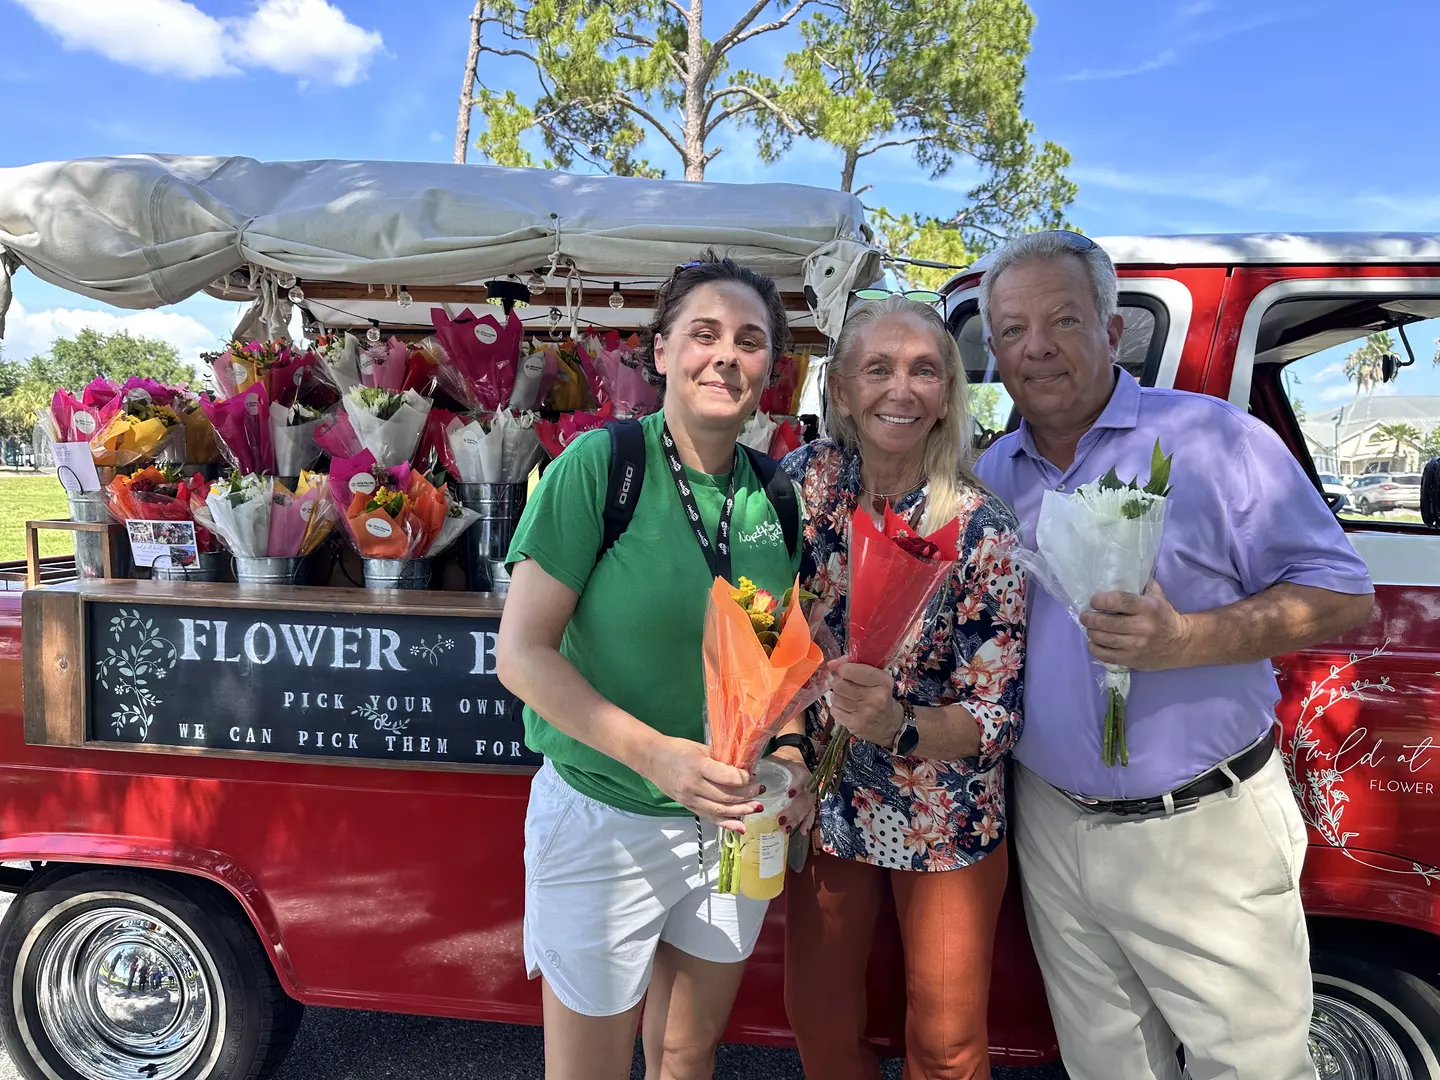 City officials and community members enjoyed fresh cut flowers as a gift from HCA Florida Healthcare hospitals.